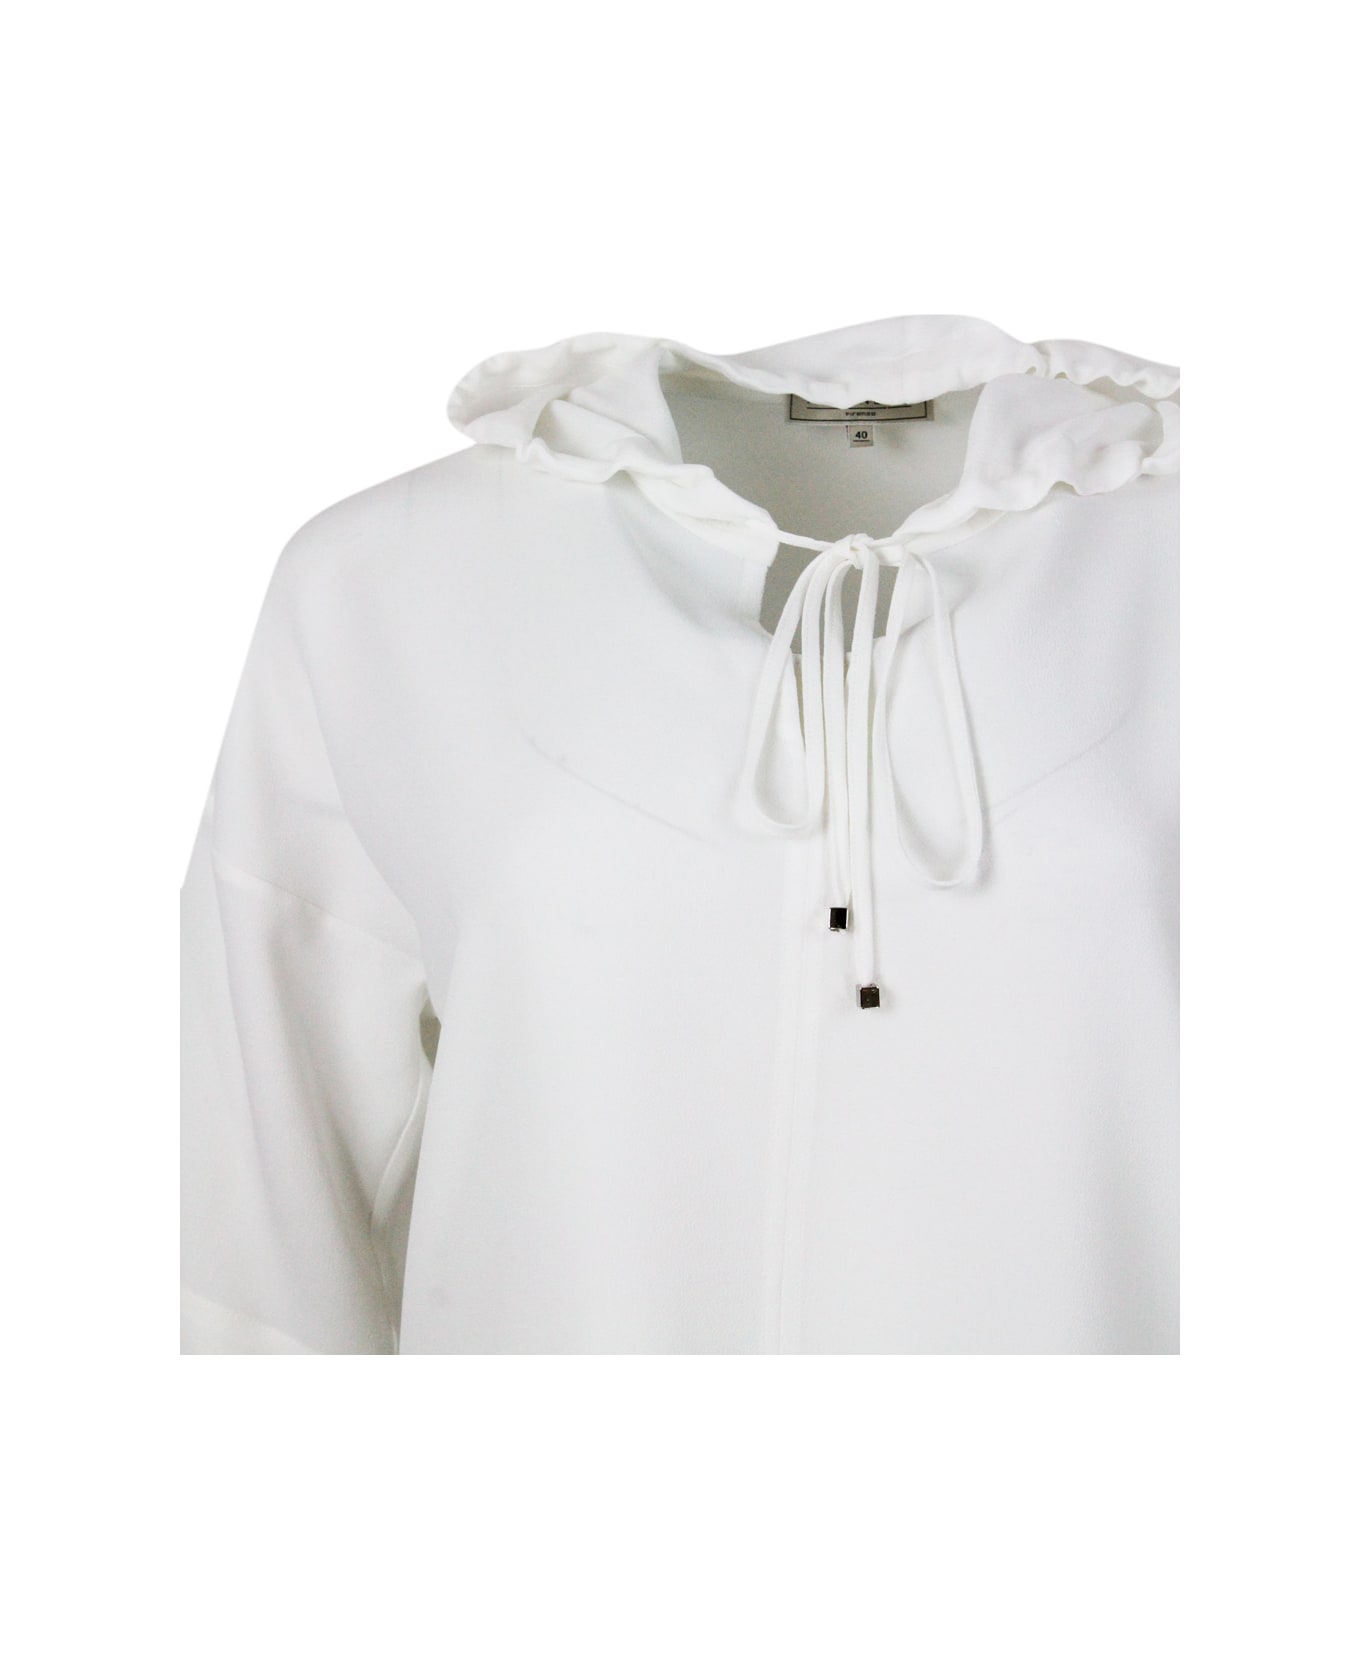 Antonelli Lightweight Short-sleeved Stretch Silk Crepe Shirt With Drawstring Hood. Fluid Fit - White ブラウス